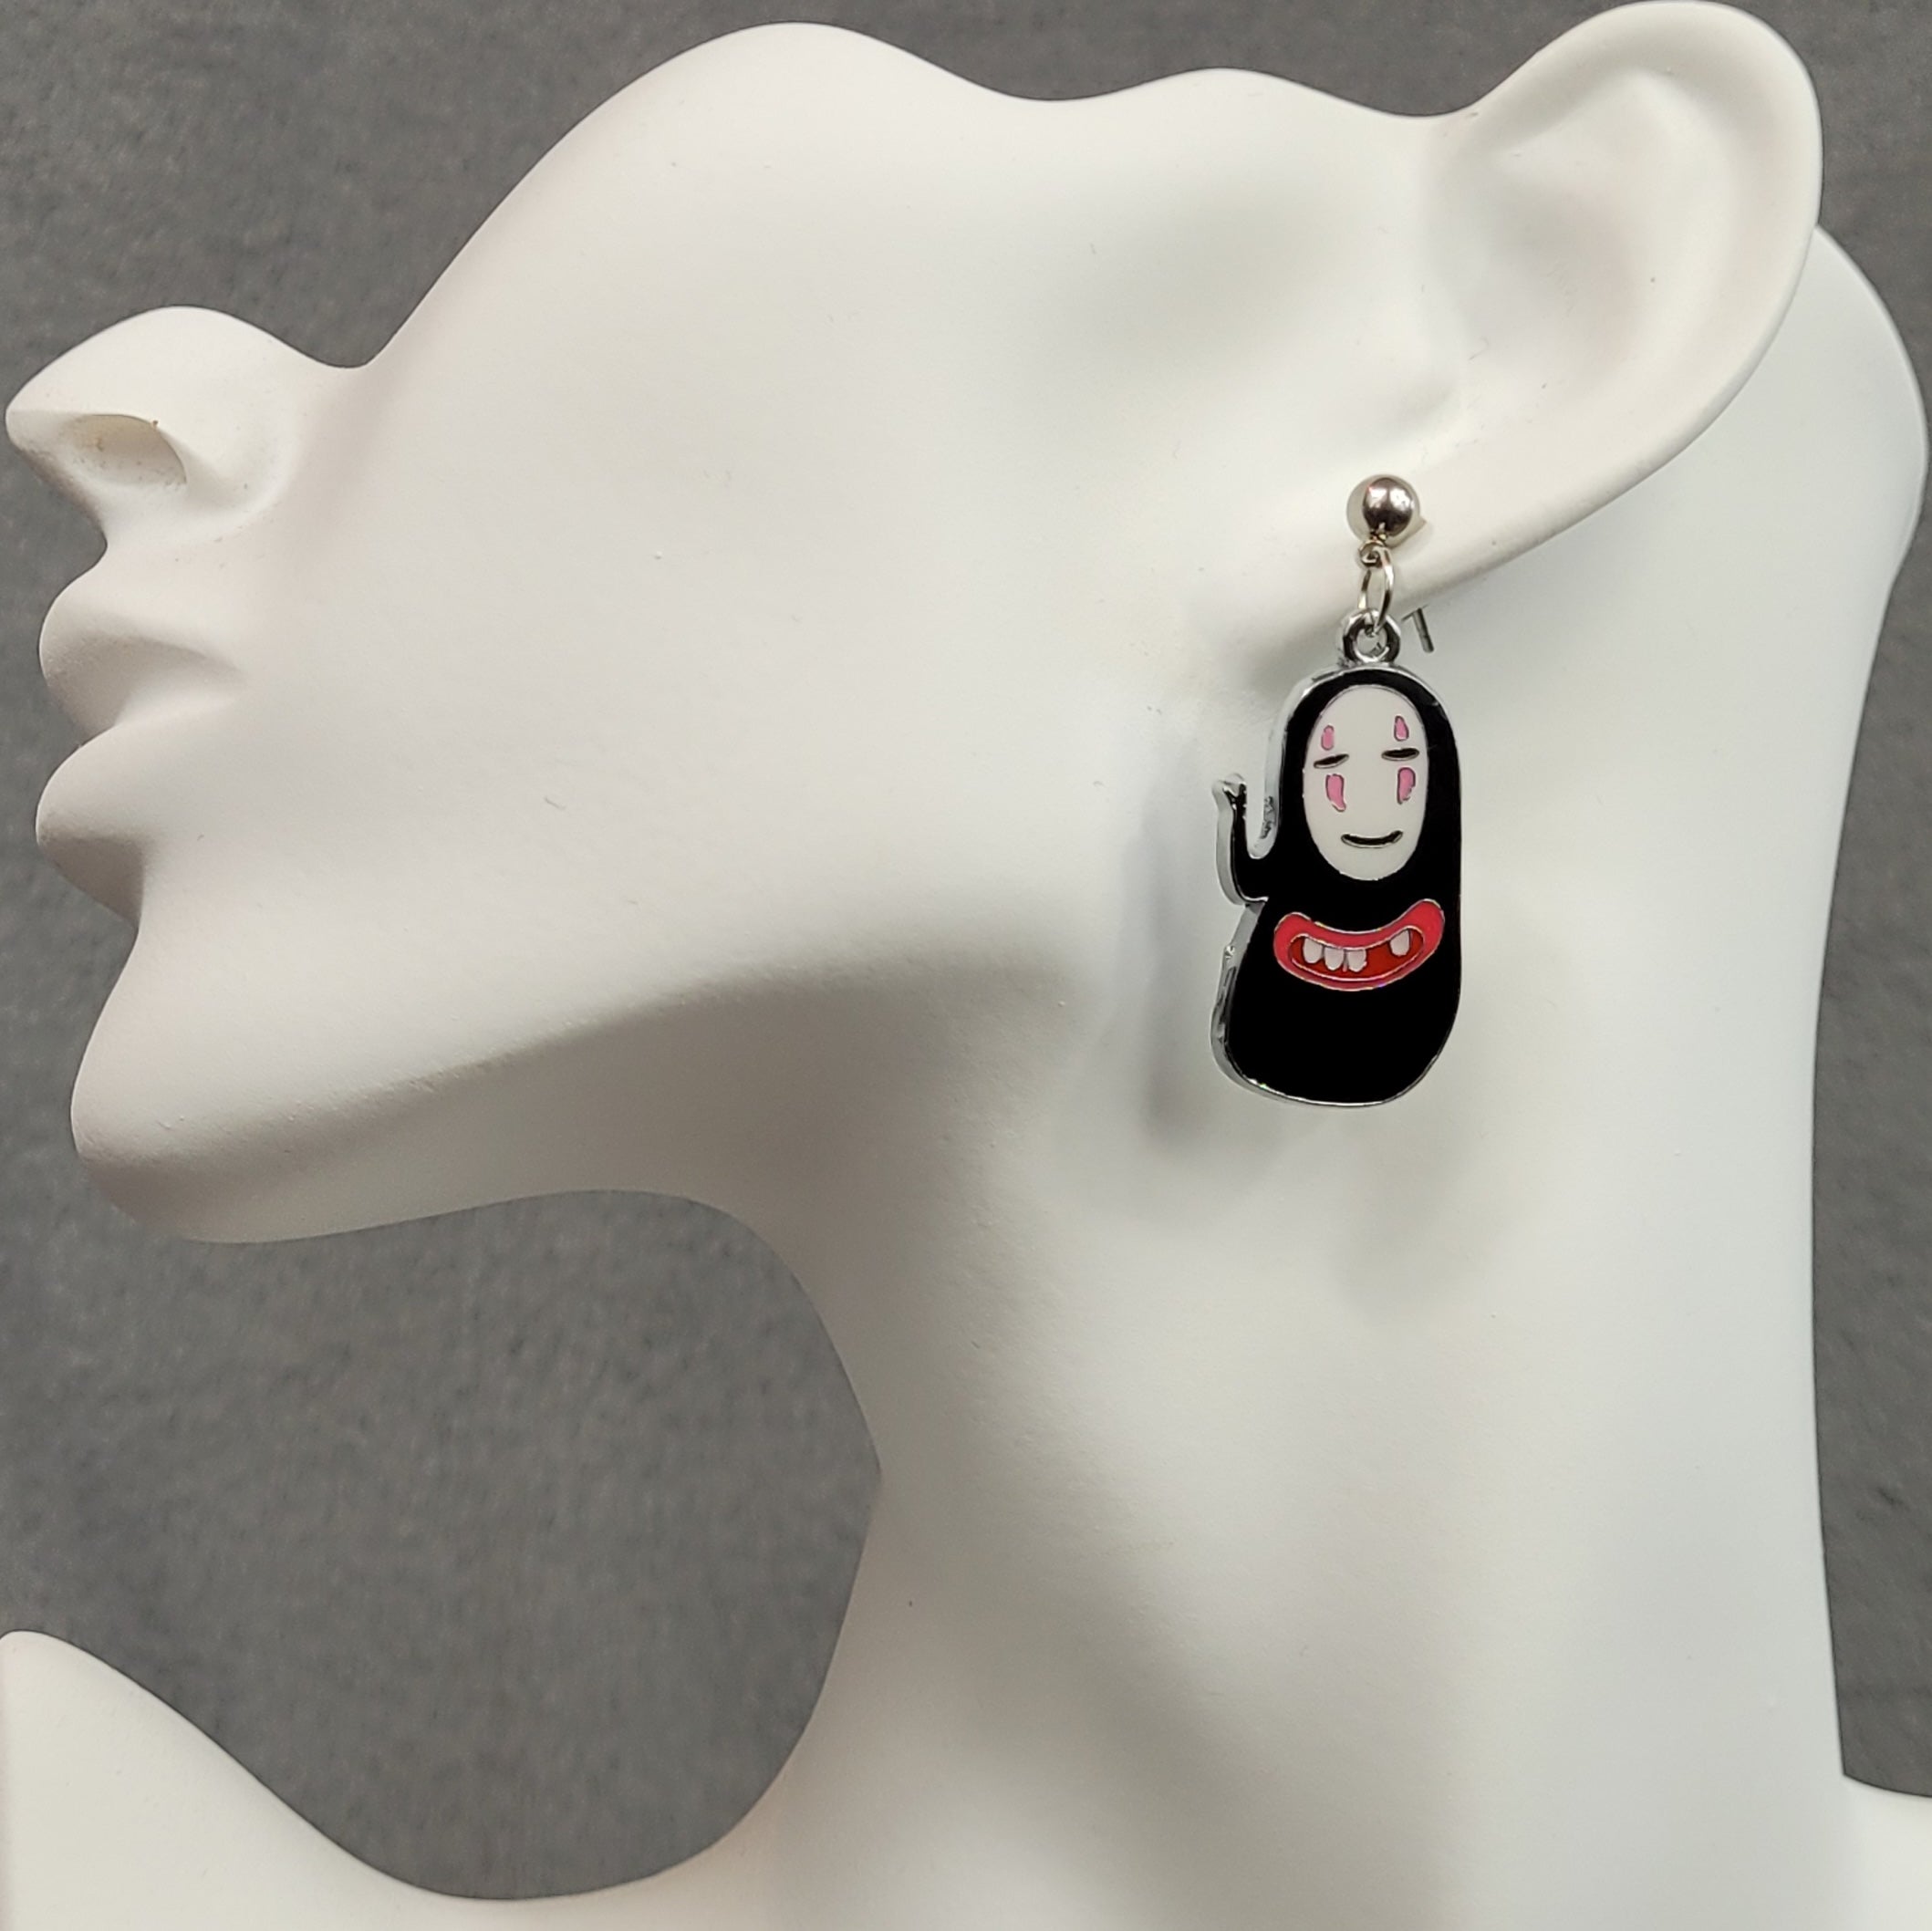 No Face with a Smile Anime Earrings